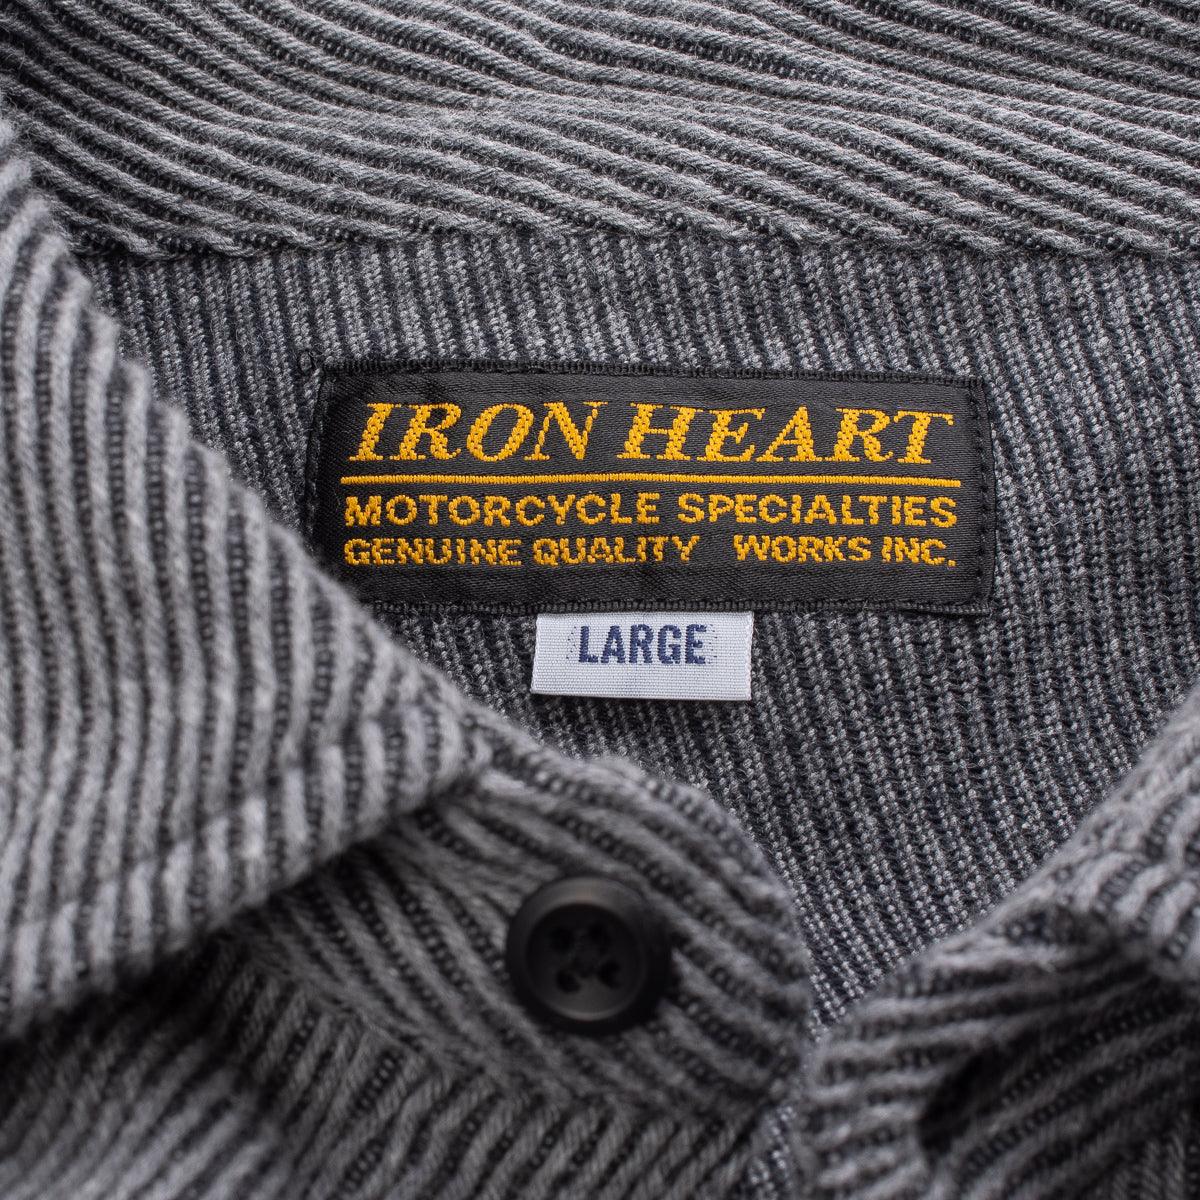 Image showing the IHSH-254 - Top Dyed Heavy Kersey Western Shirt Grey which is a Shirts described by the following info IHSALE, Iron Heart, Released, Shirts, Tops and sold on the IRON HEART GERMANY online store